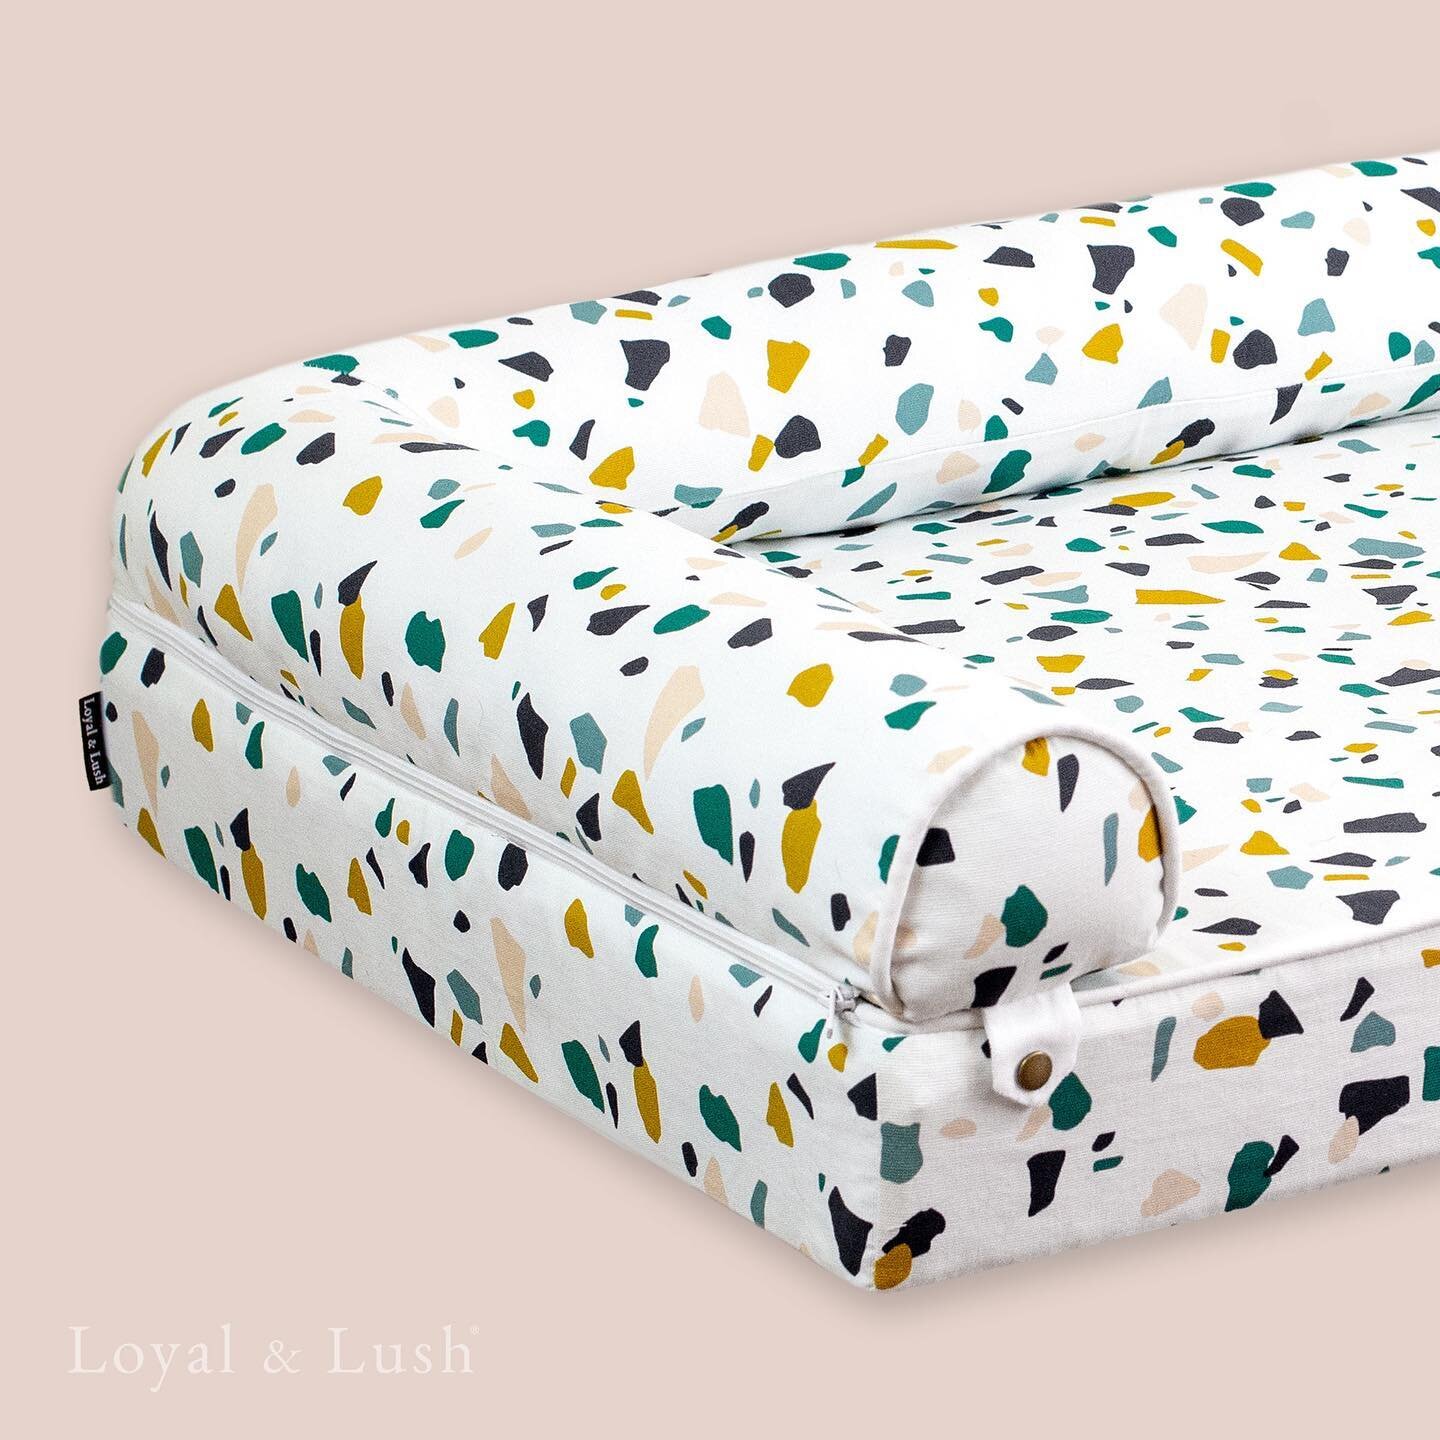 I love everything about working with Tim and Mer&eacute;t, the humans behind @loyalandlush pet beds. I&rsquo;ve been helping them develop collections of prints for their Lush Bed, which they designed to be stylish, durable, and easy to clean (by way 